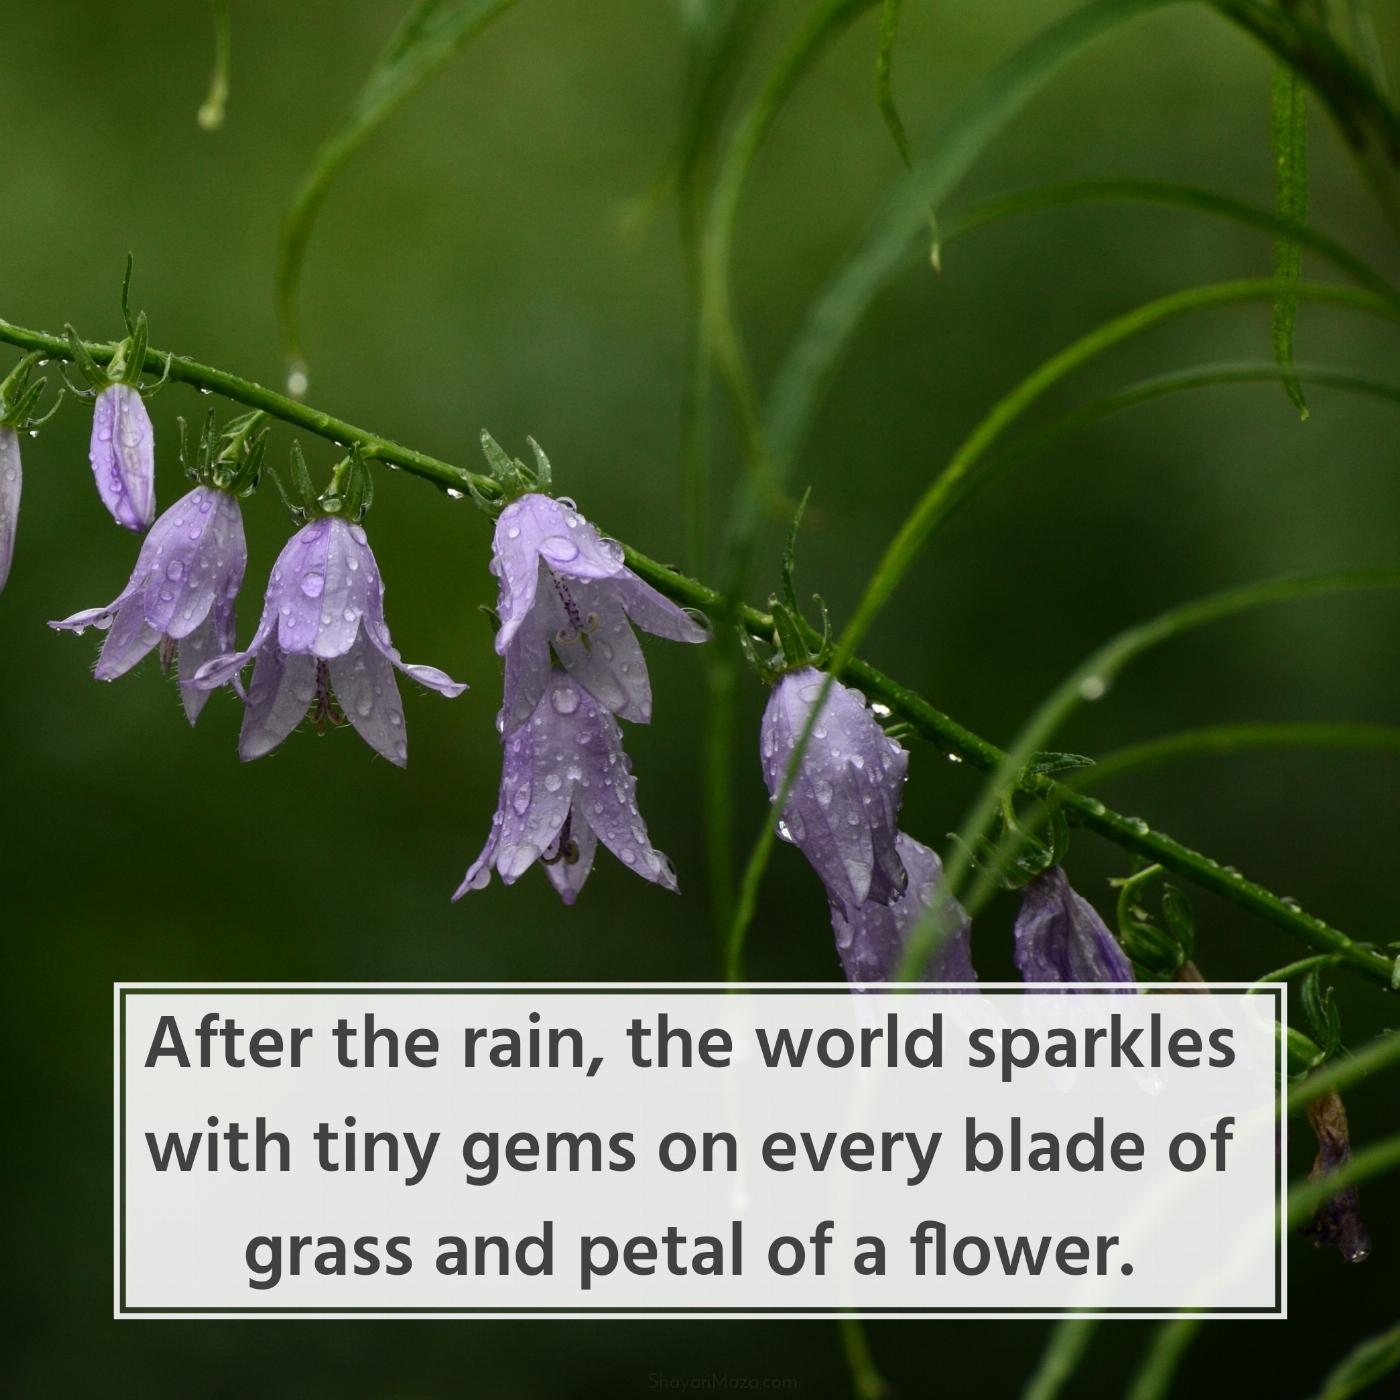 After the rain the world sparkles with tiny gems on every blade of grass